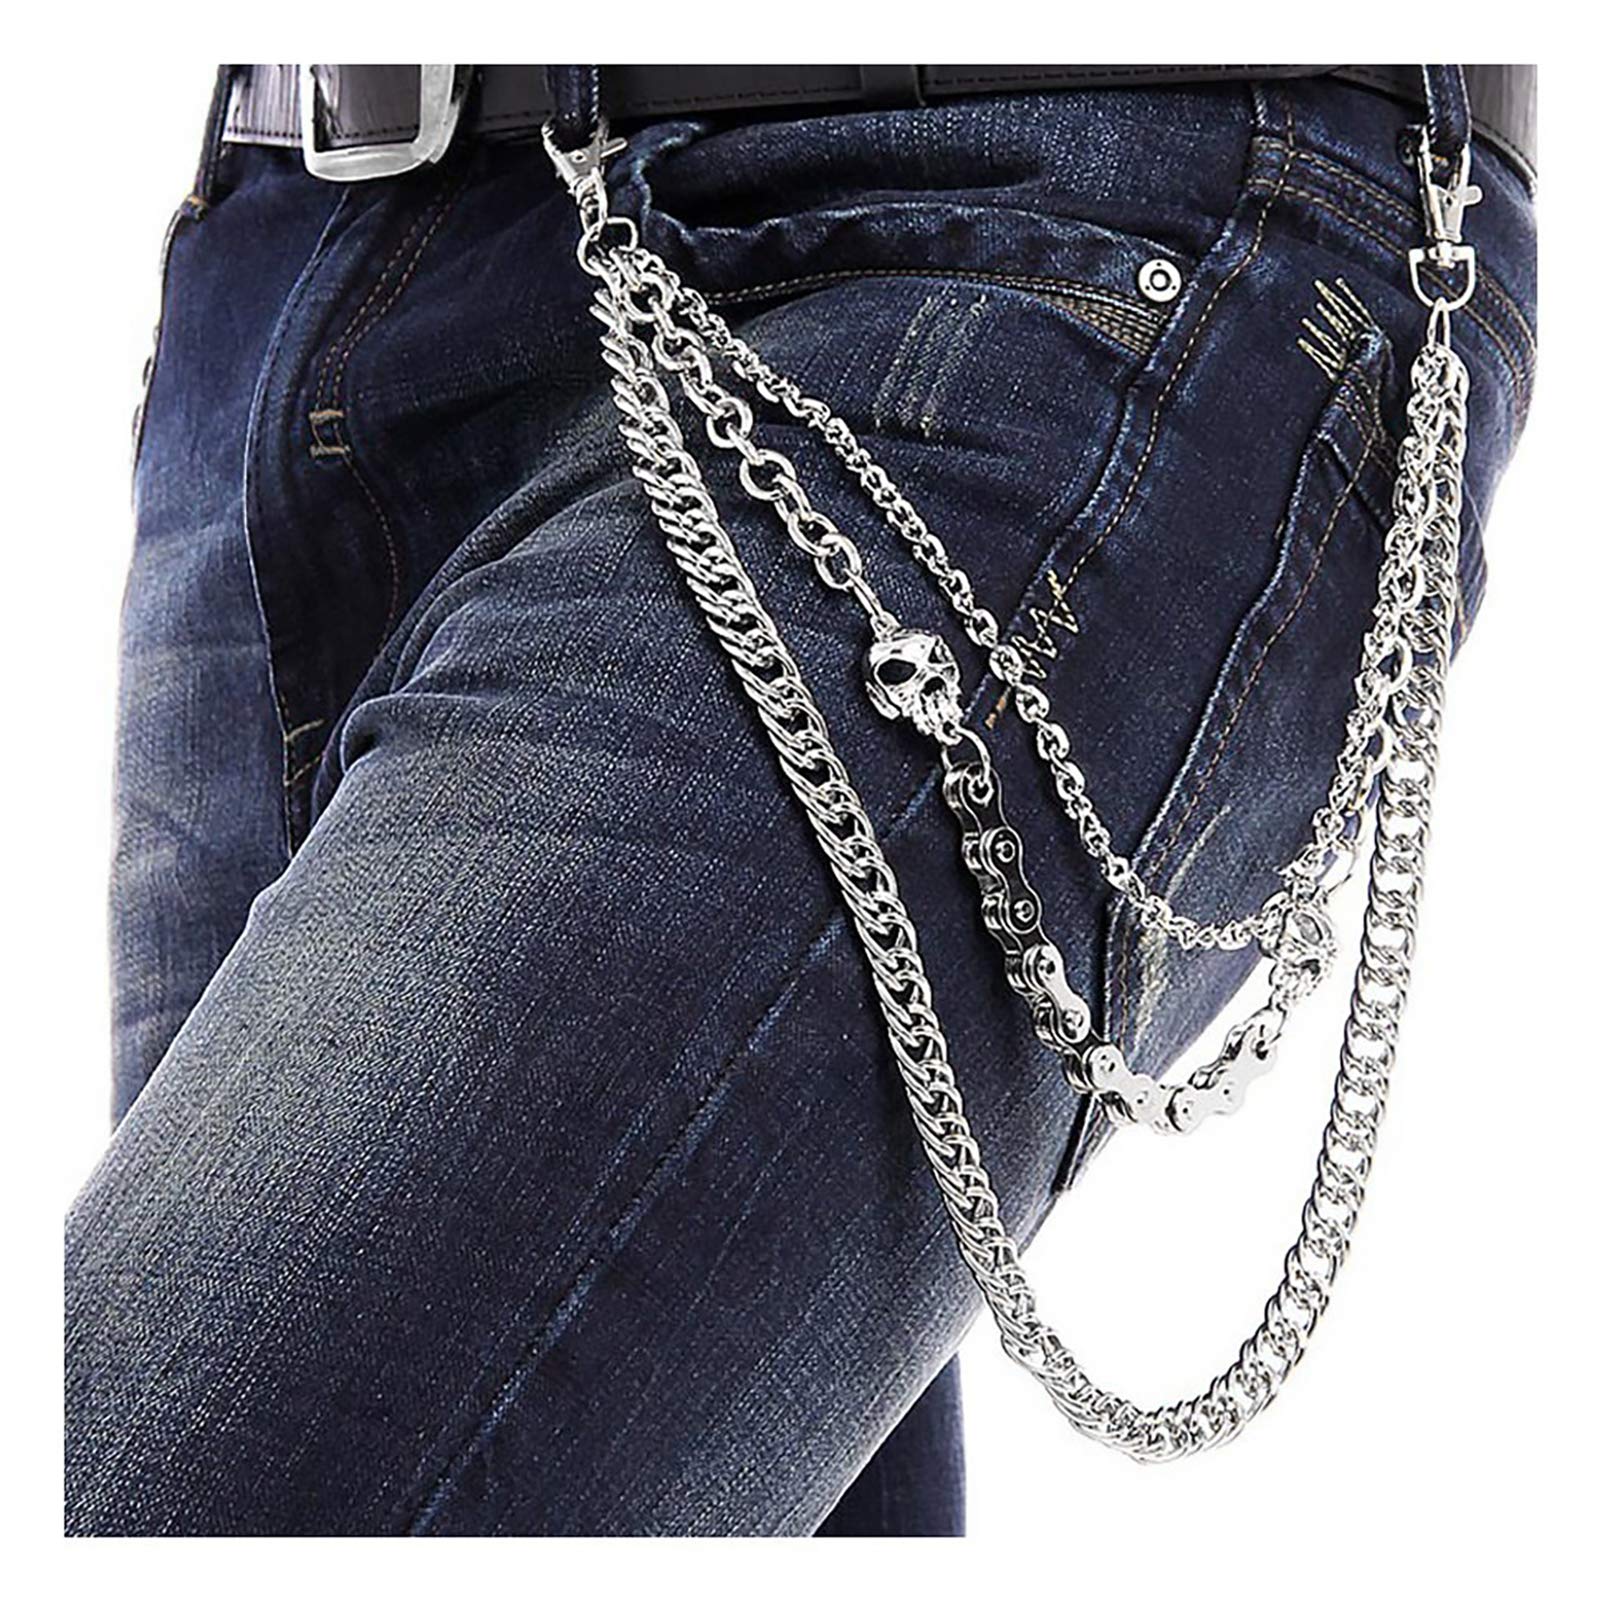 Jeans Chains Wallet Chain Pants Chain, Silver Pocket Chain Skull Chains Hip Hop Rock Chains Punk Gothic Metal Belt Chain Biker Trouser Chain Accessory Jewelry Gift for Men/Women